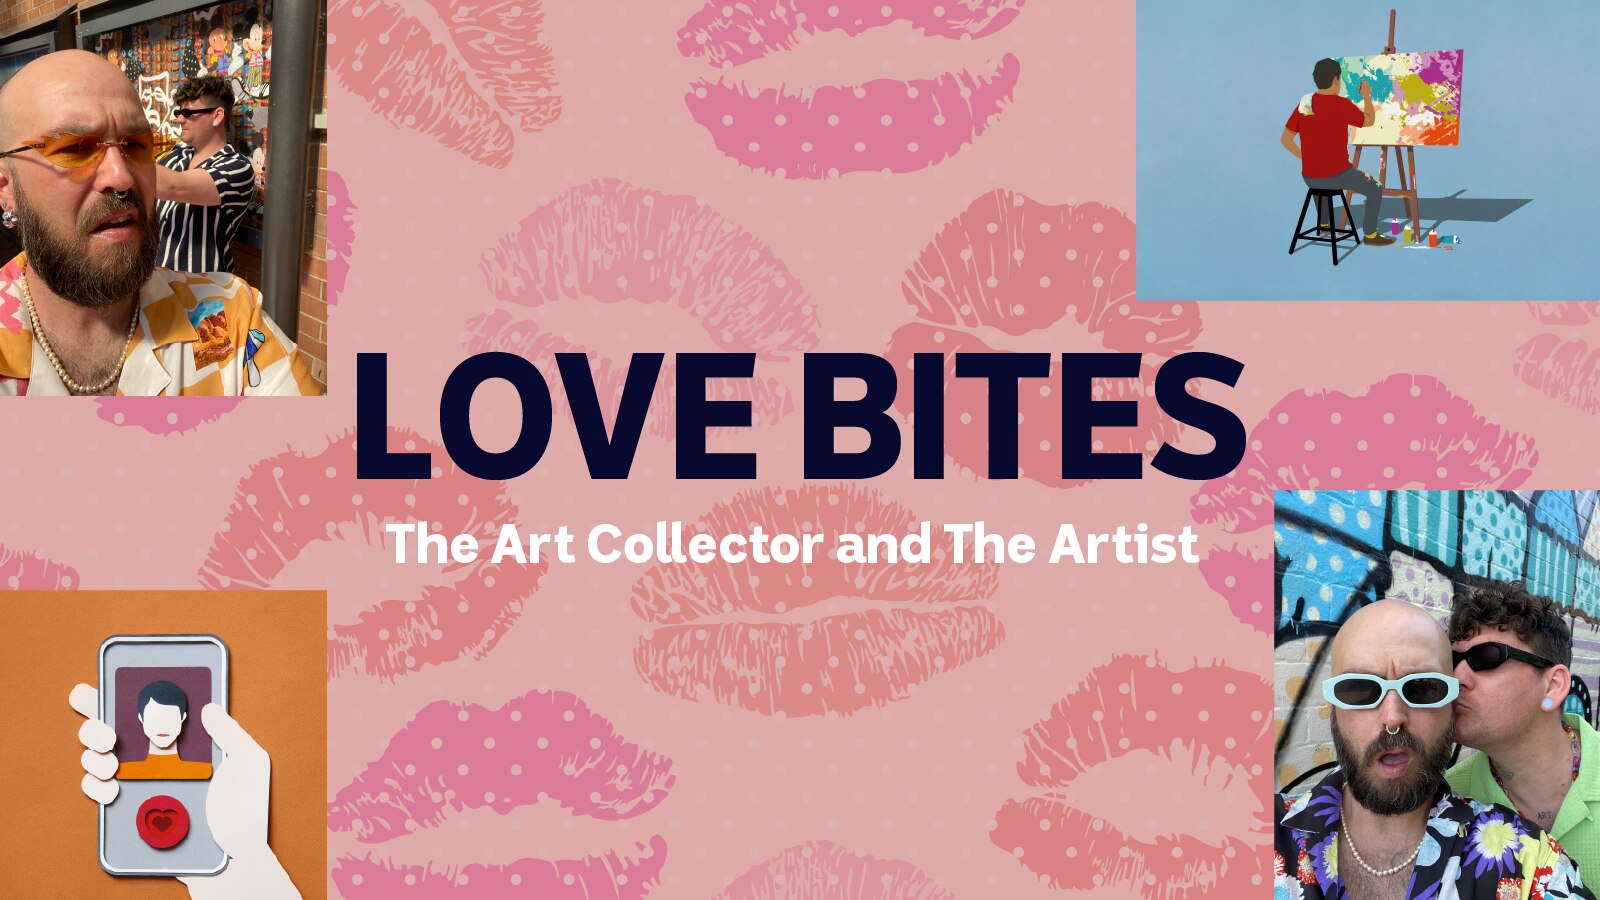 QUEER LOVE BITES: The Art Collector and The Artist